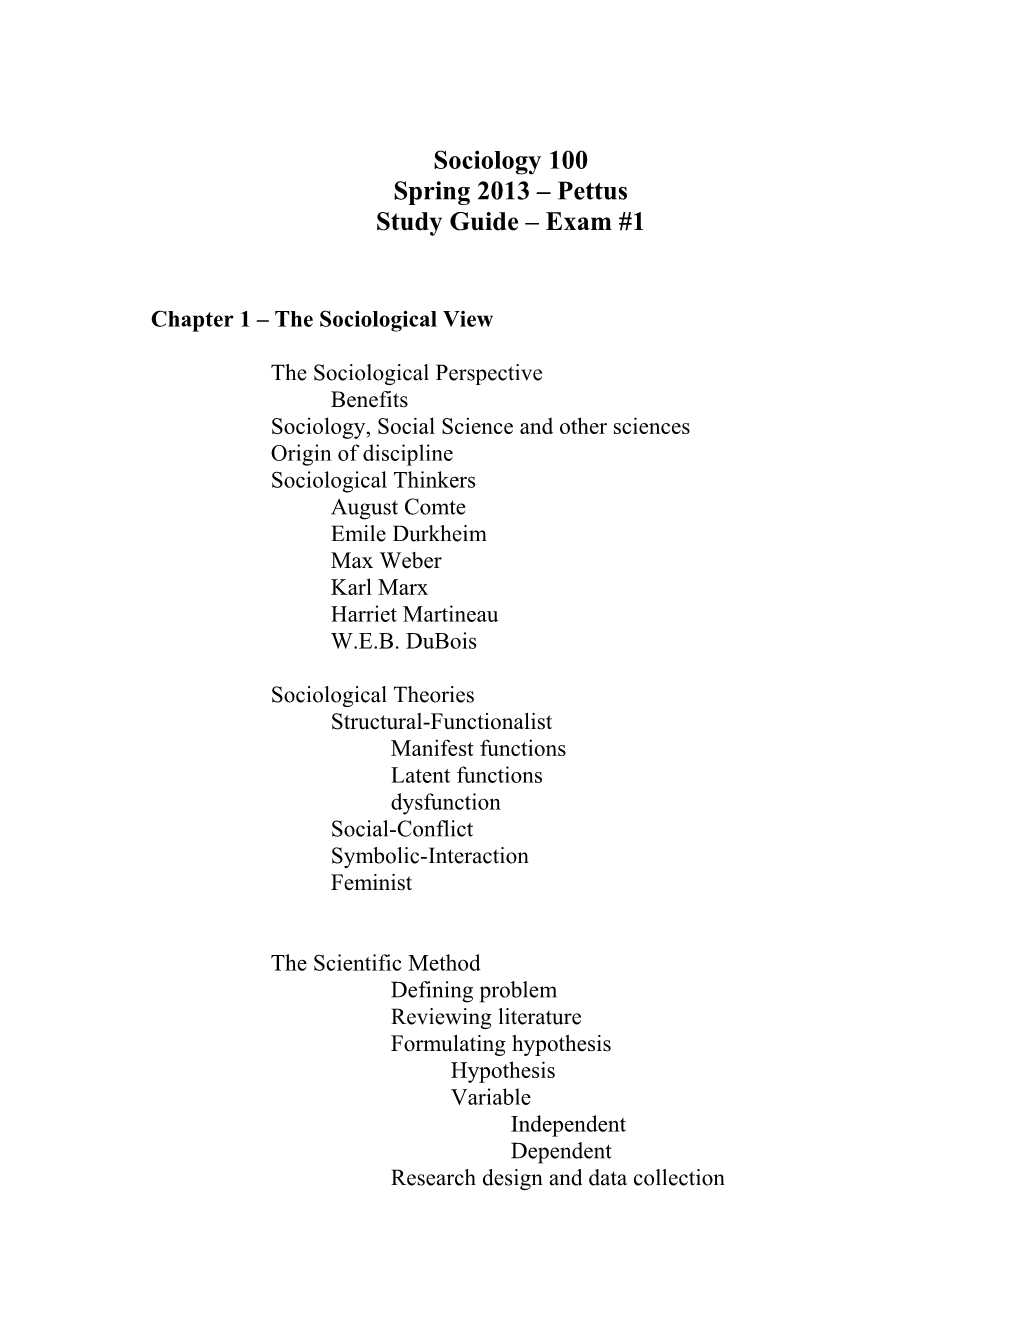 Chapter 1 the Sociological View